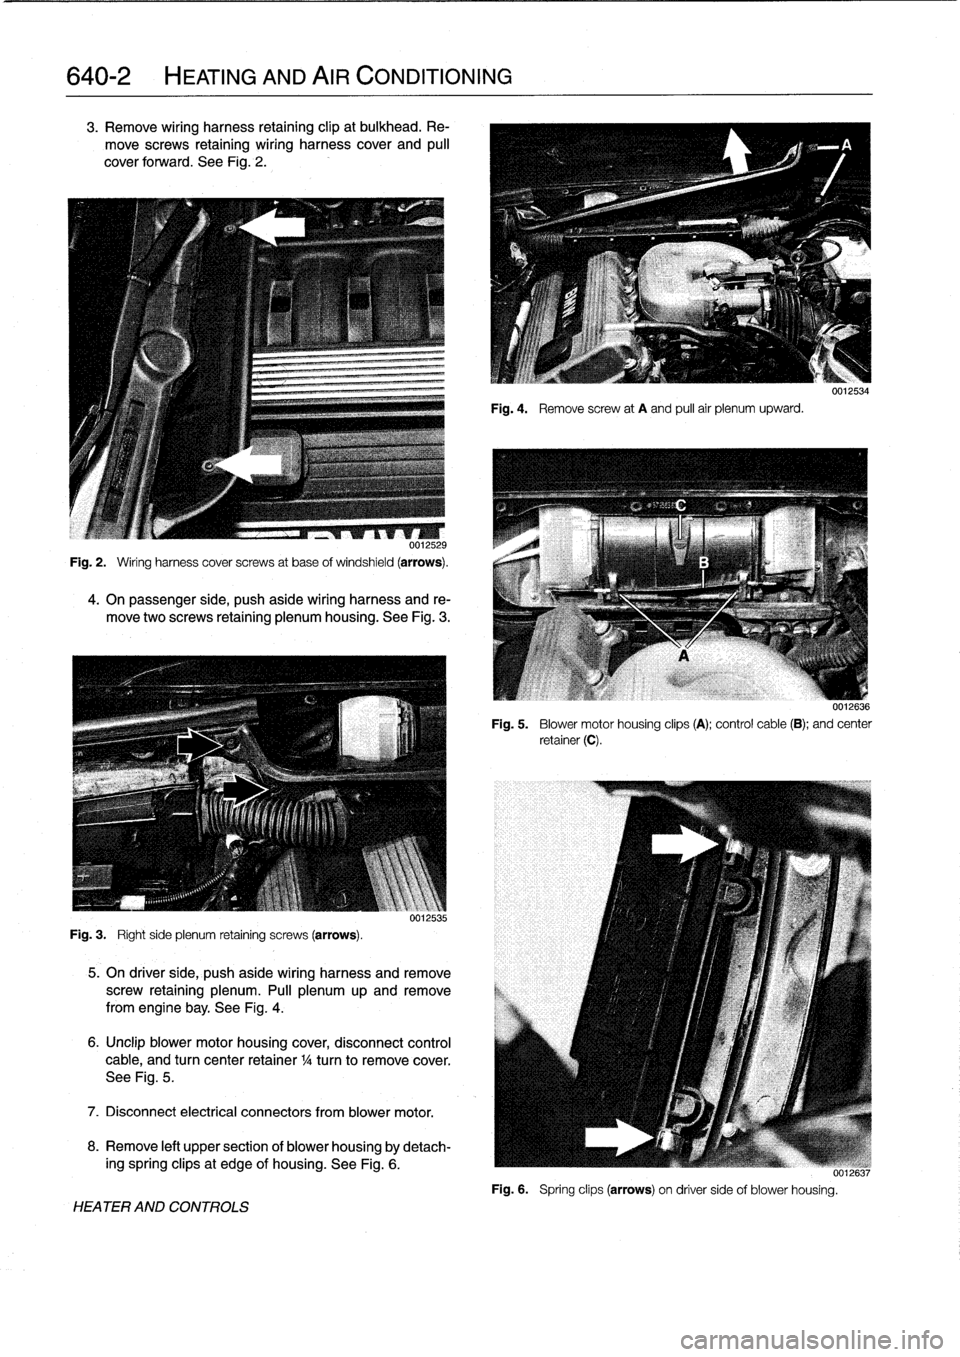 BMW 318i 1998 E36 Owners Manual 
640-2

	

HEATING
AND
AIR
CONDITIONING

3
.
Remove
wiring
harness
retaining
clip
at
bulkhead
.
Re-

move
screws
retaining
wiring
harness
cover
and
pull

cover
forward
.
See
Fig
.
2
.

0012529

Fig
.
